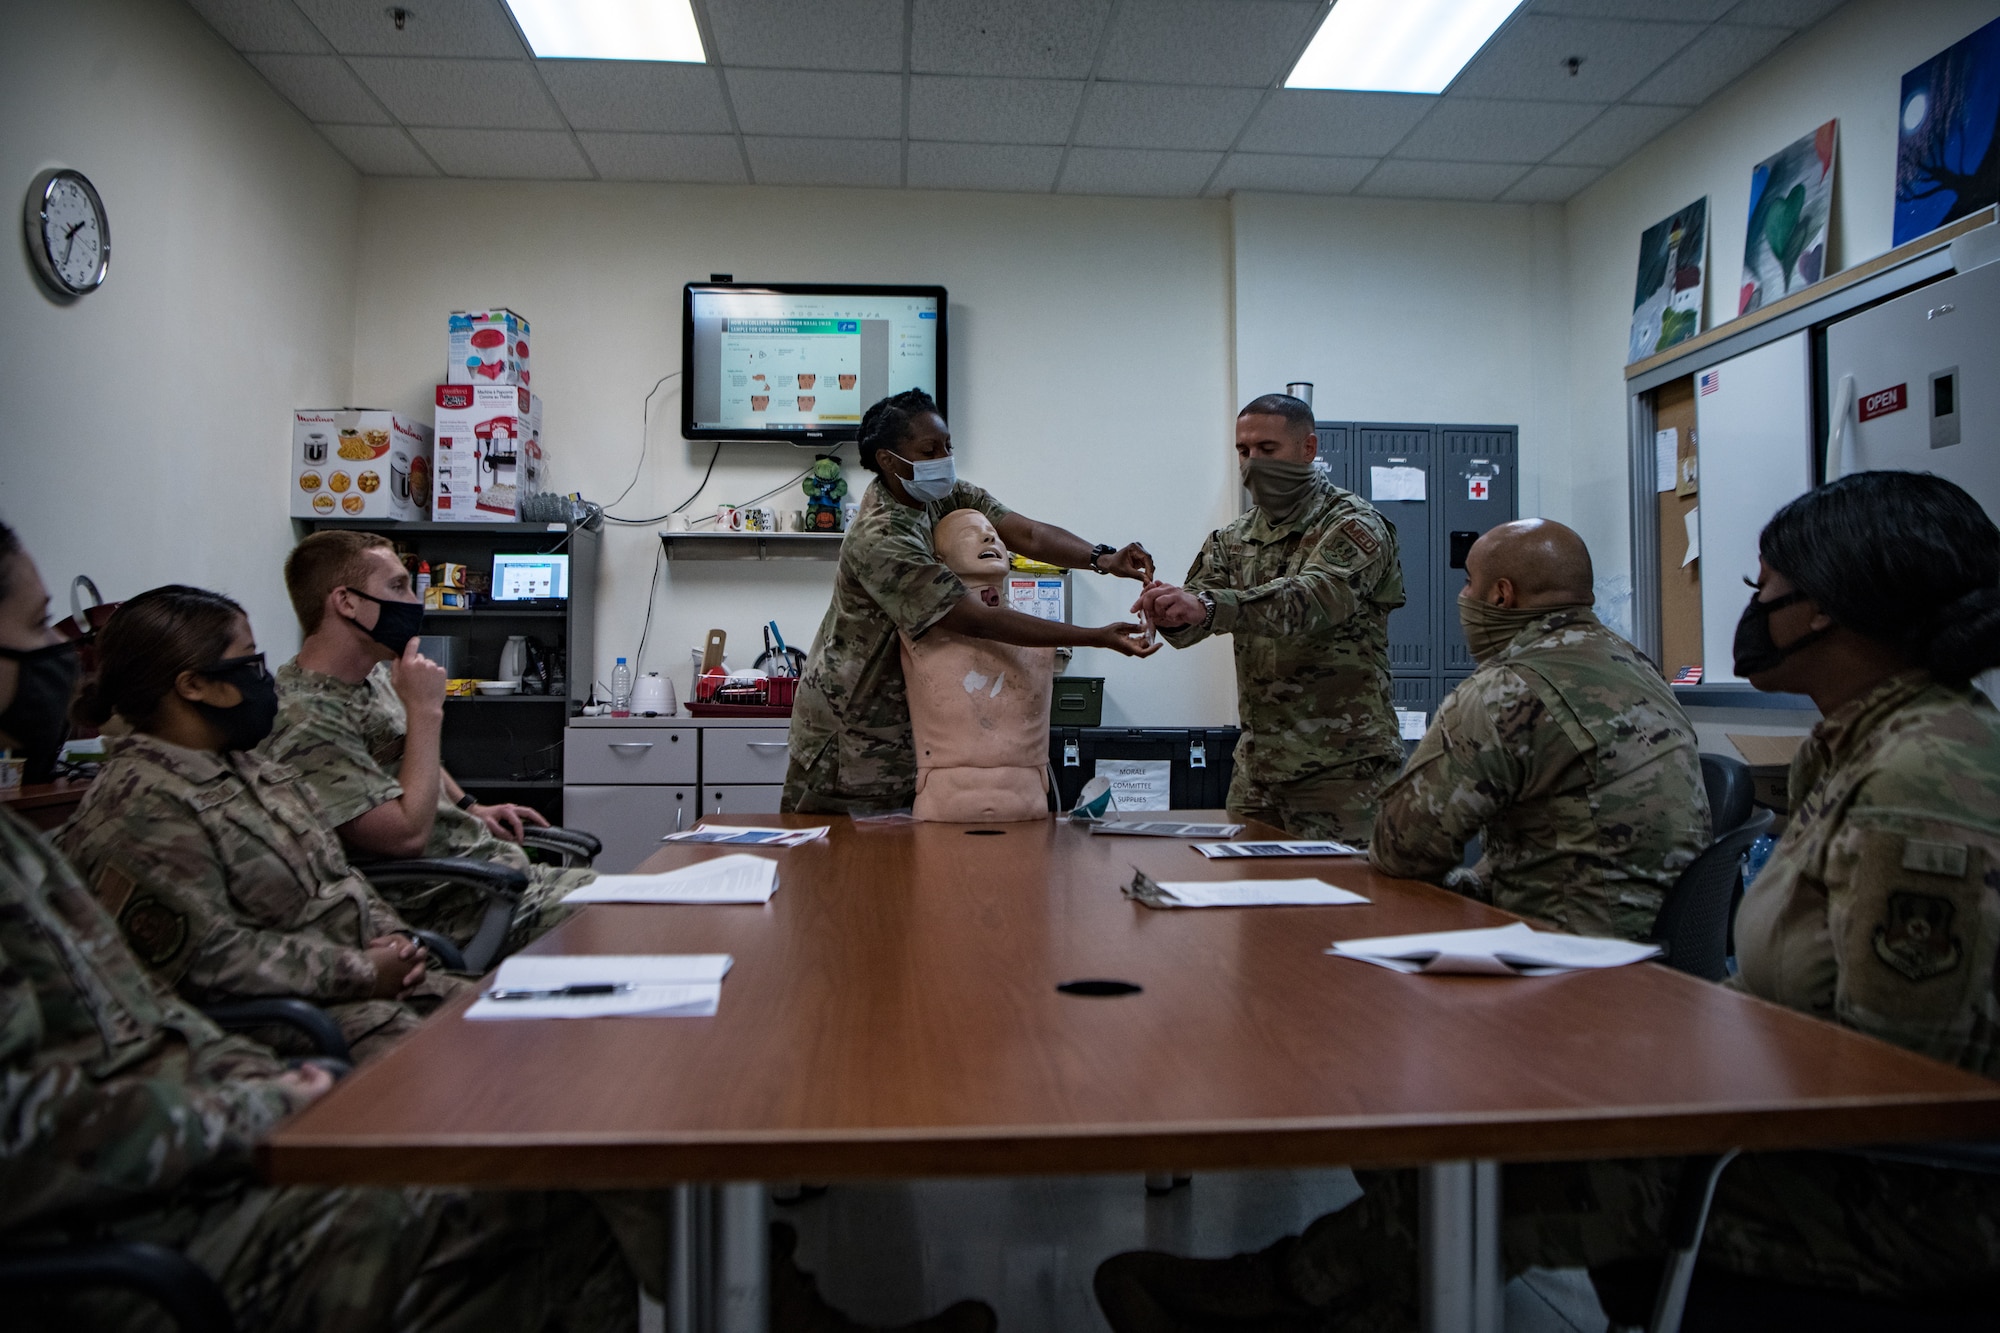 Airmen demonstrate how to administer a COVID-19 anterior nasal swab test